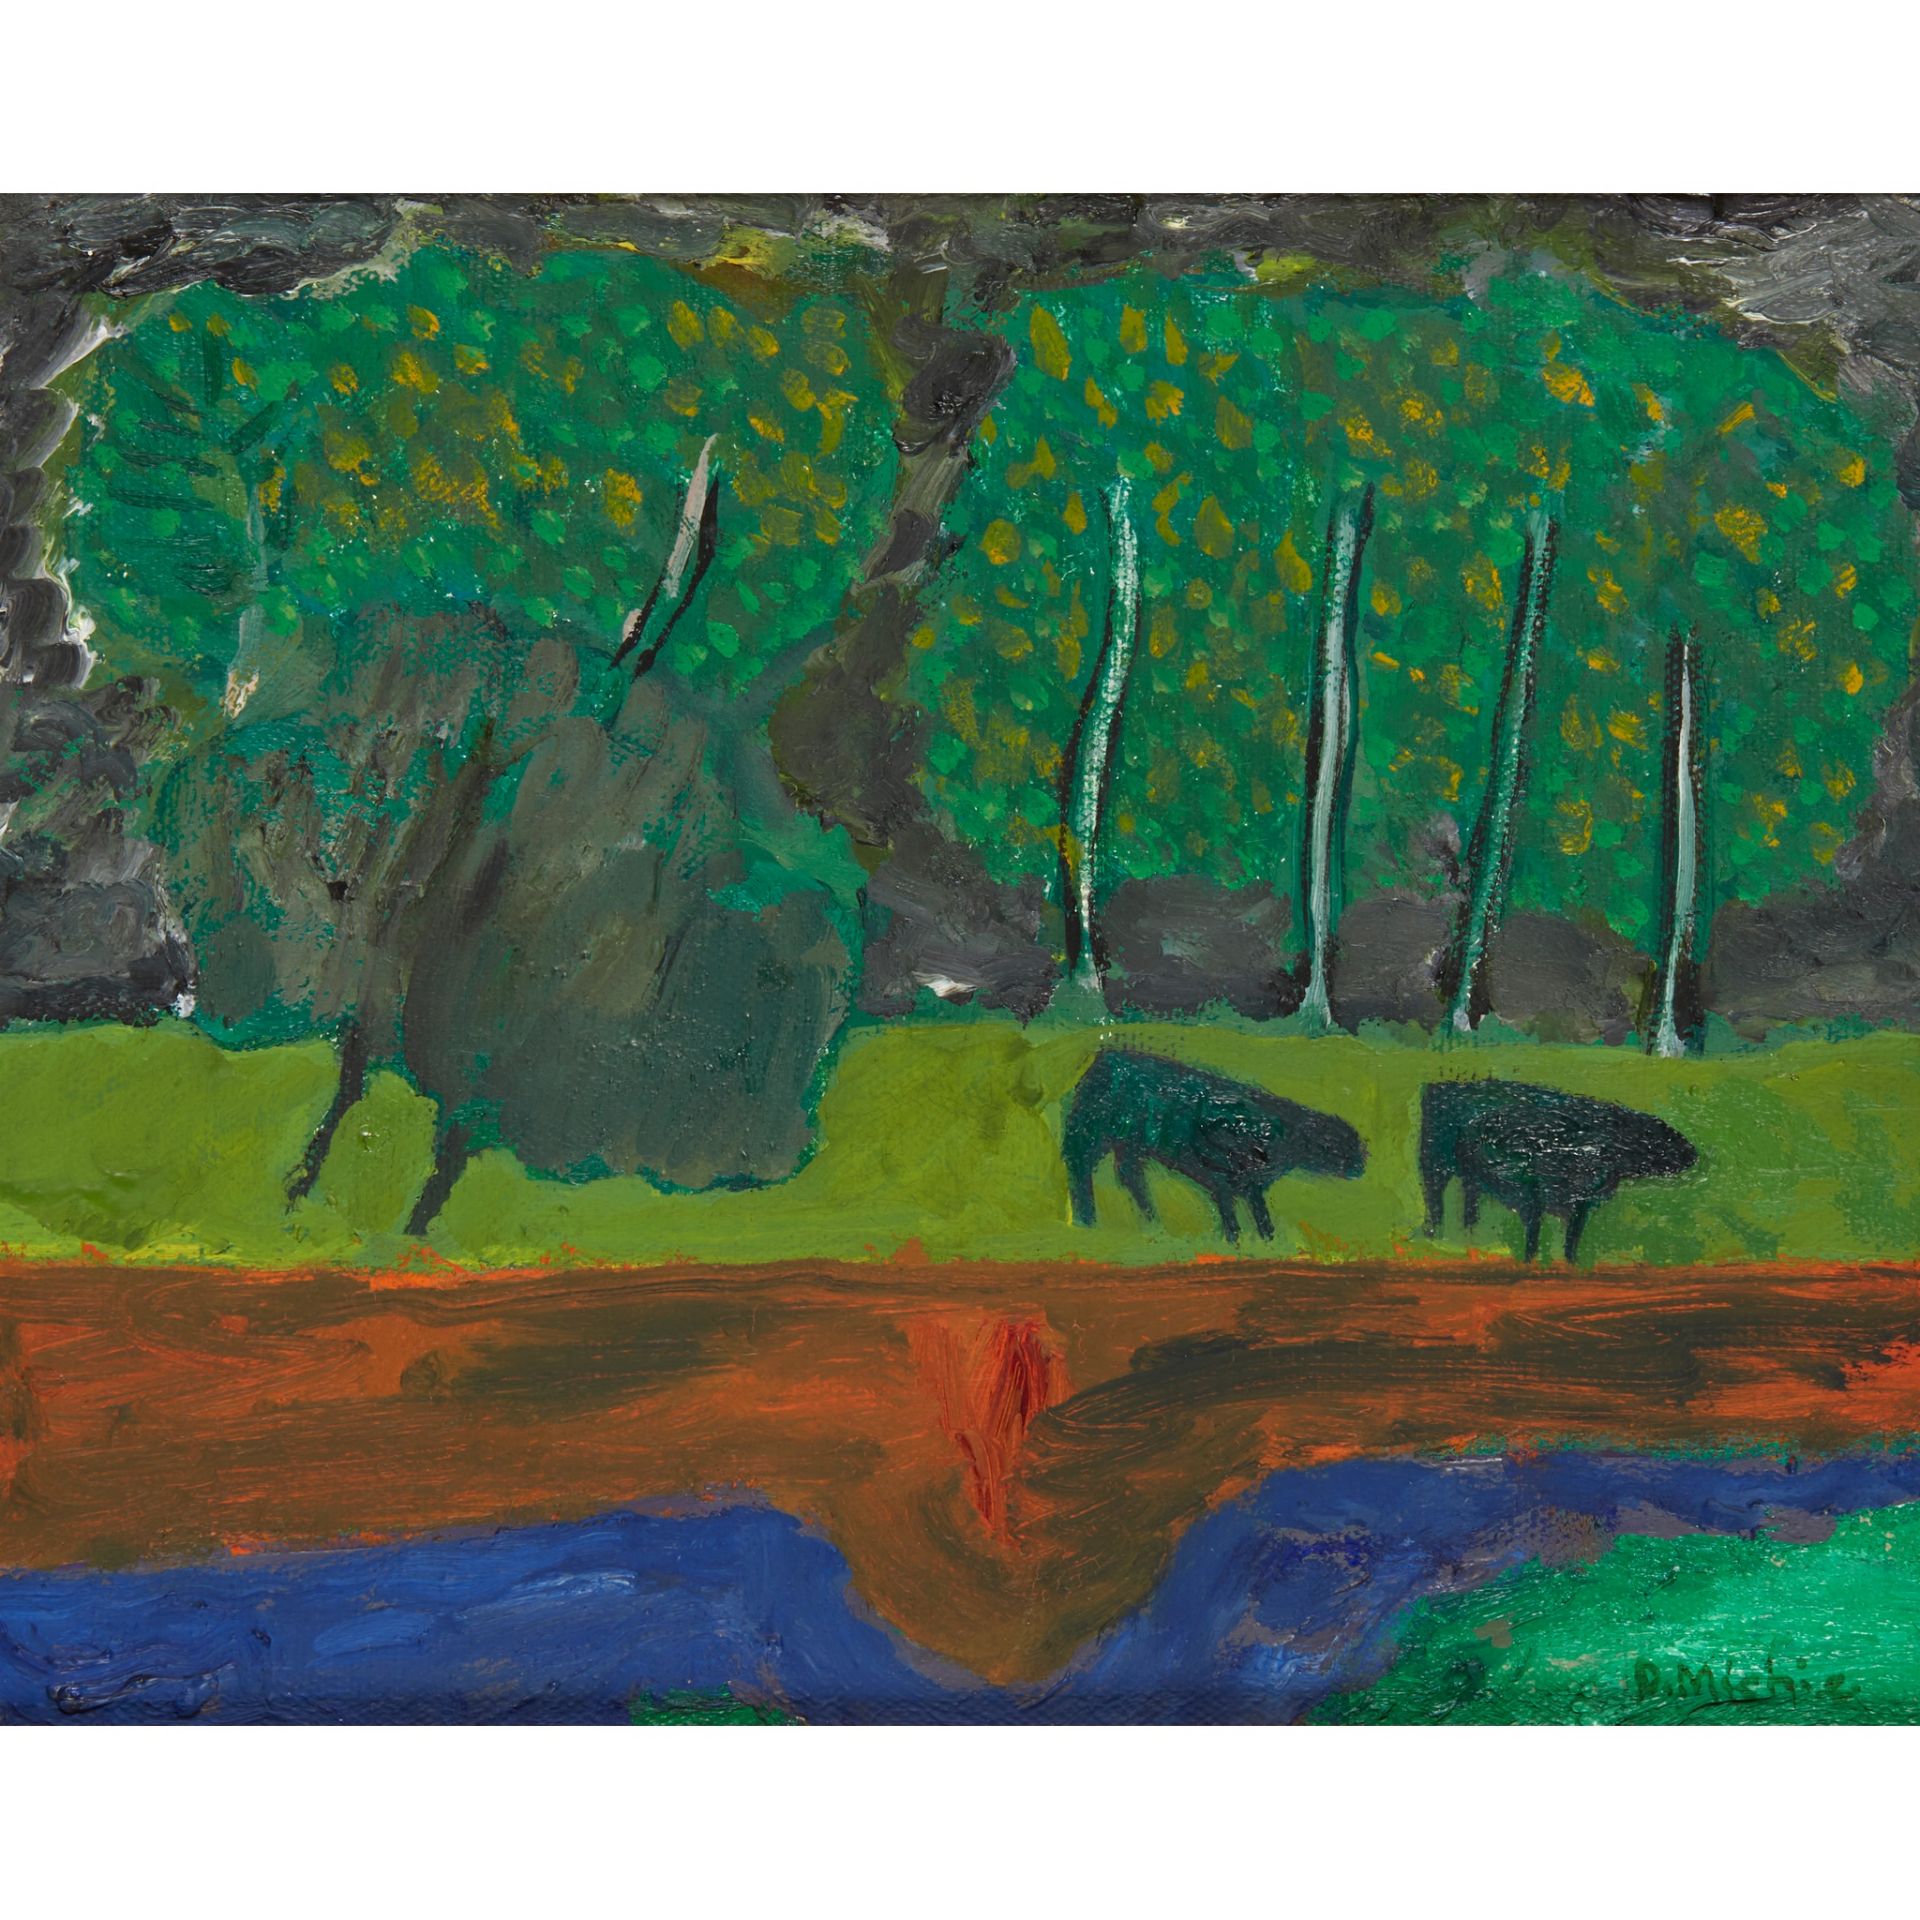 § DAVID MICHIE O.B.E., R.S.A., R.G.I., F.R.S.A (SCOTTISH 1928-2015) COWS BY THE LEADERWATER, 1981